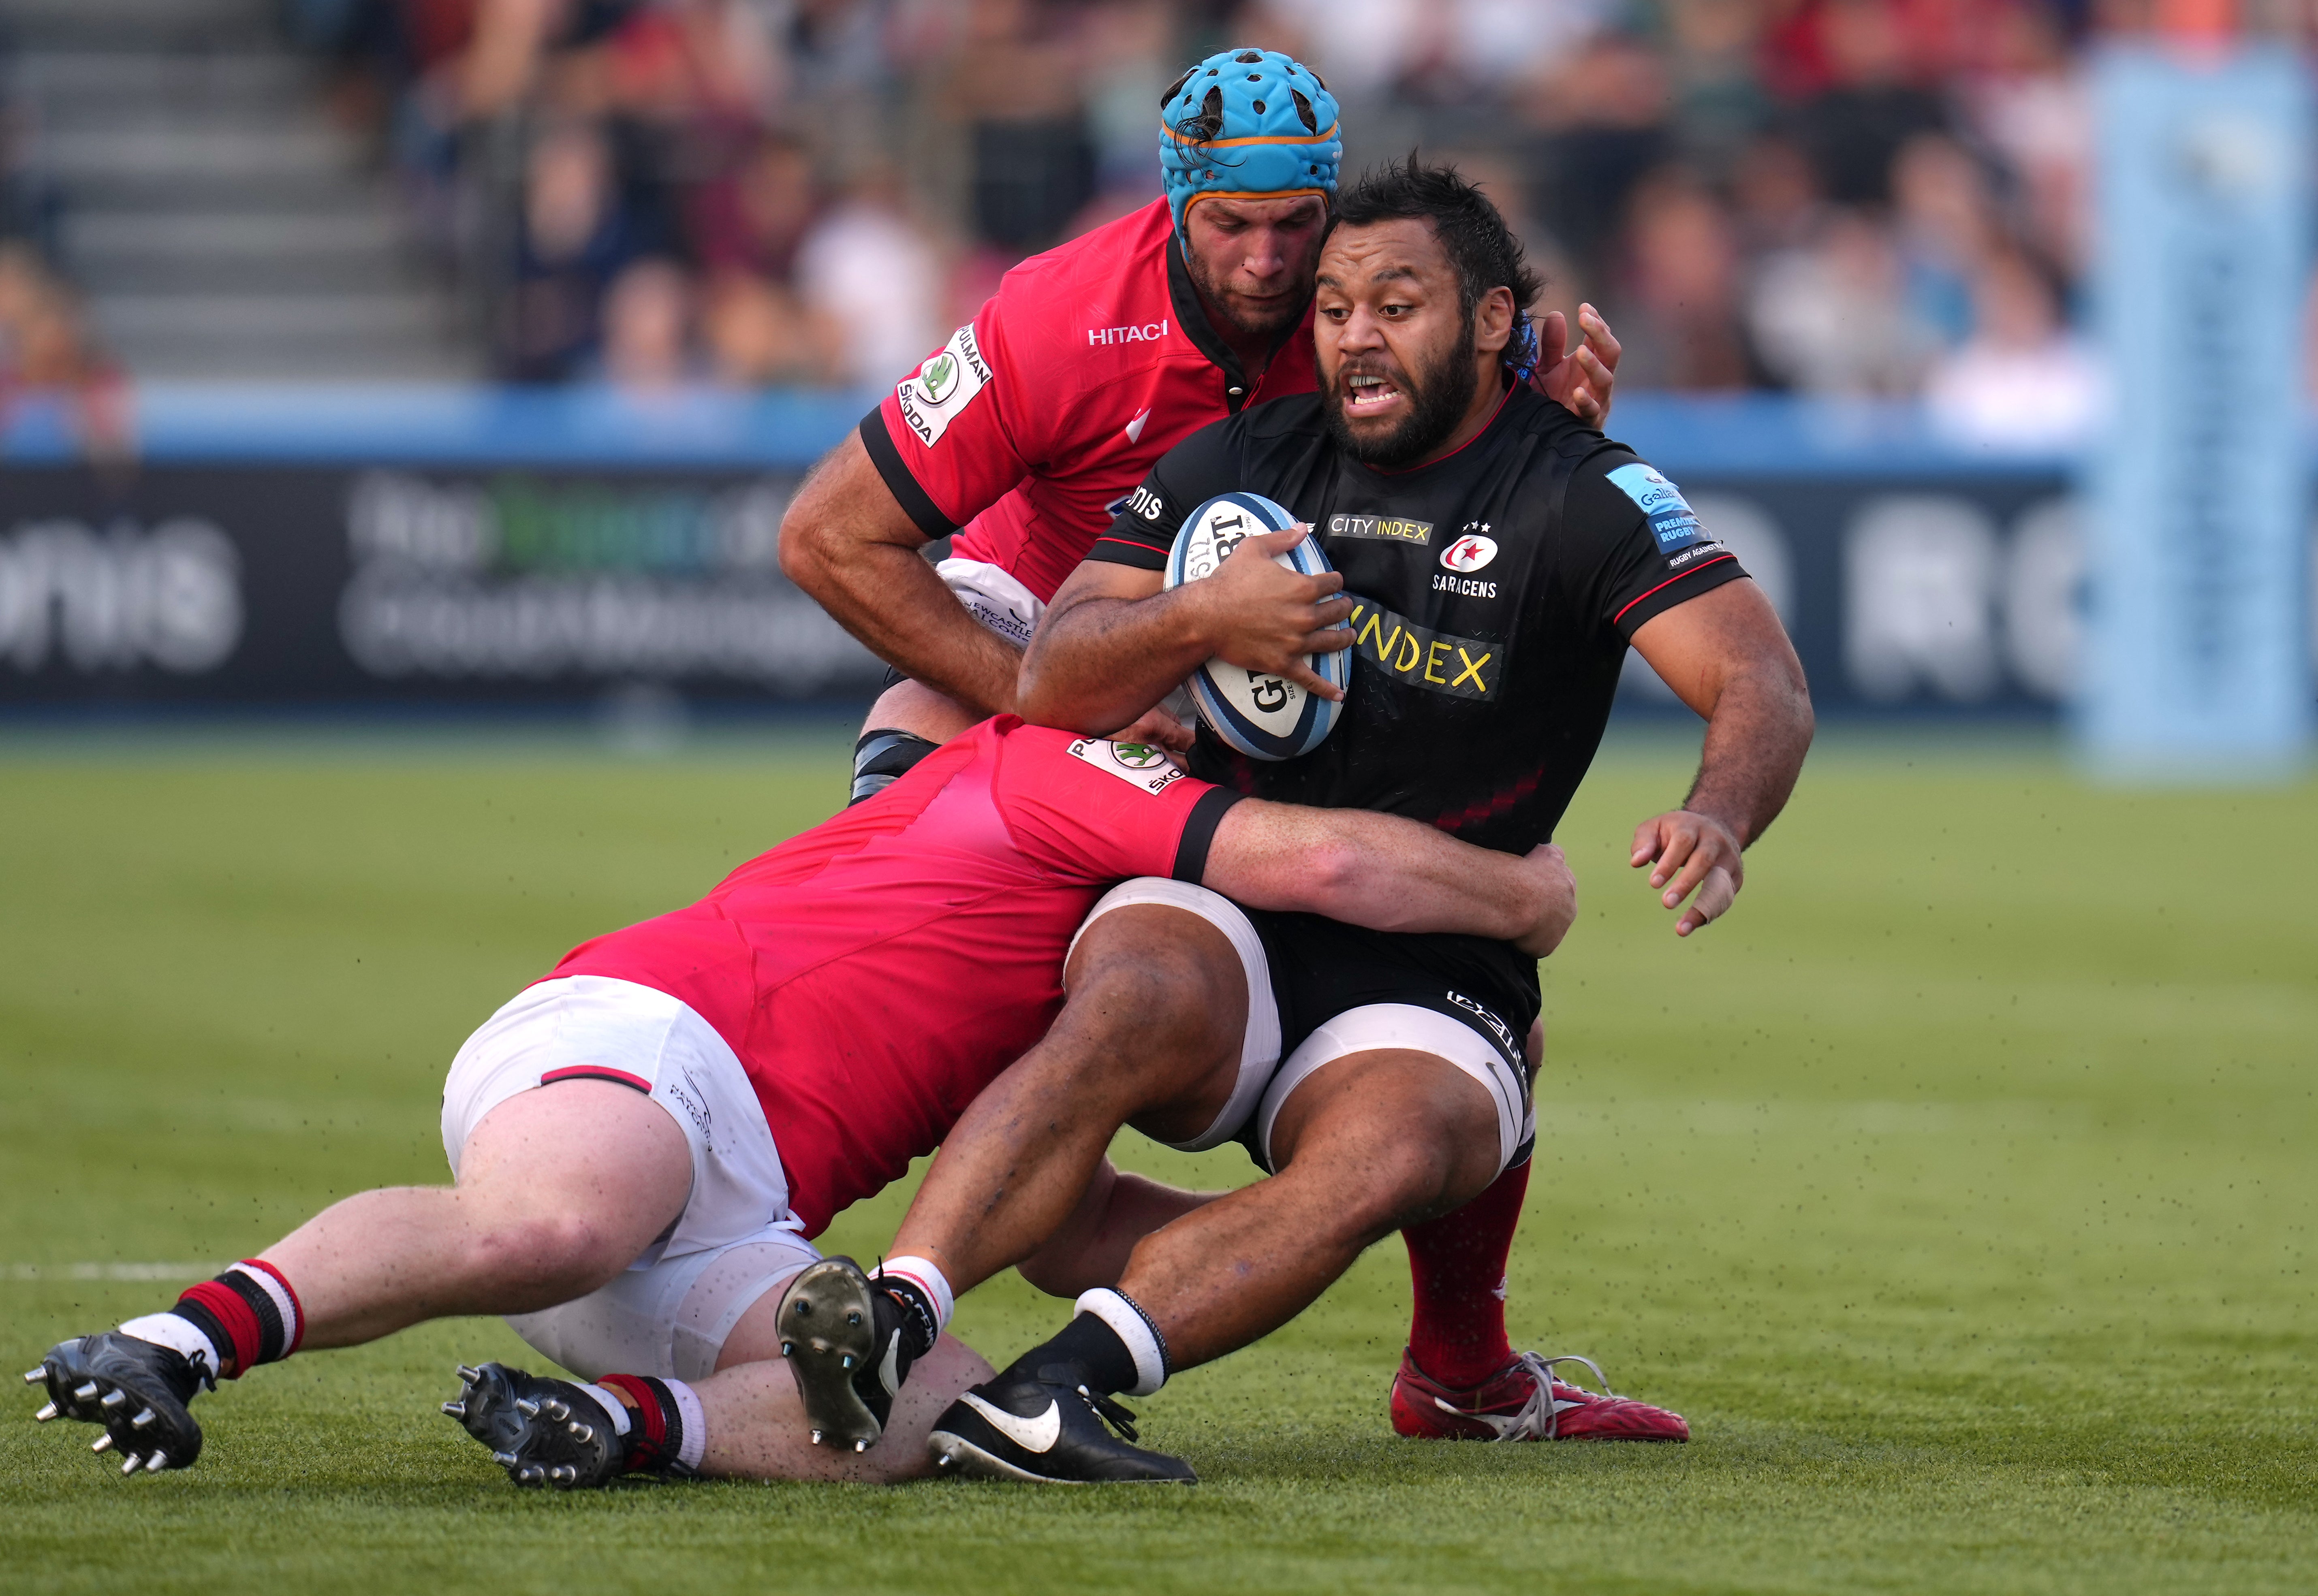 Saracens marked their Premiership homecoming by hitting back from behind to beat Newcastle (John Walton/PA)